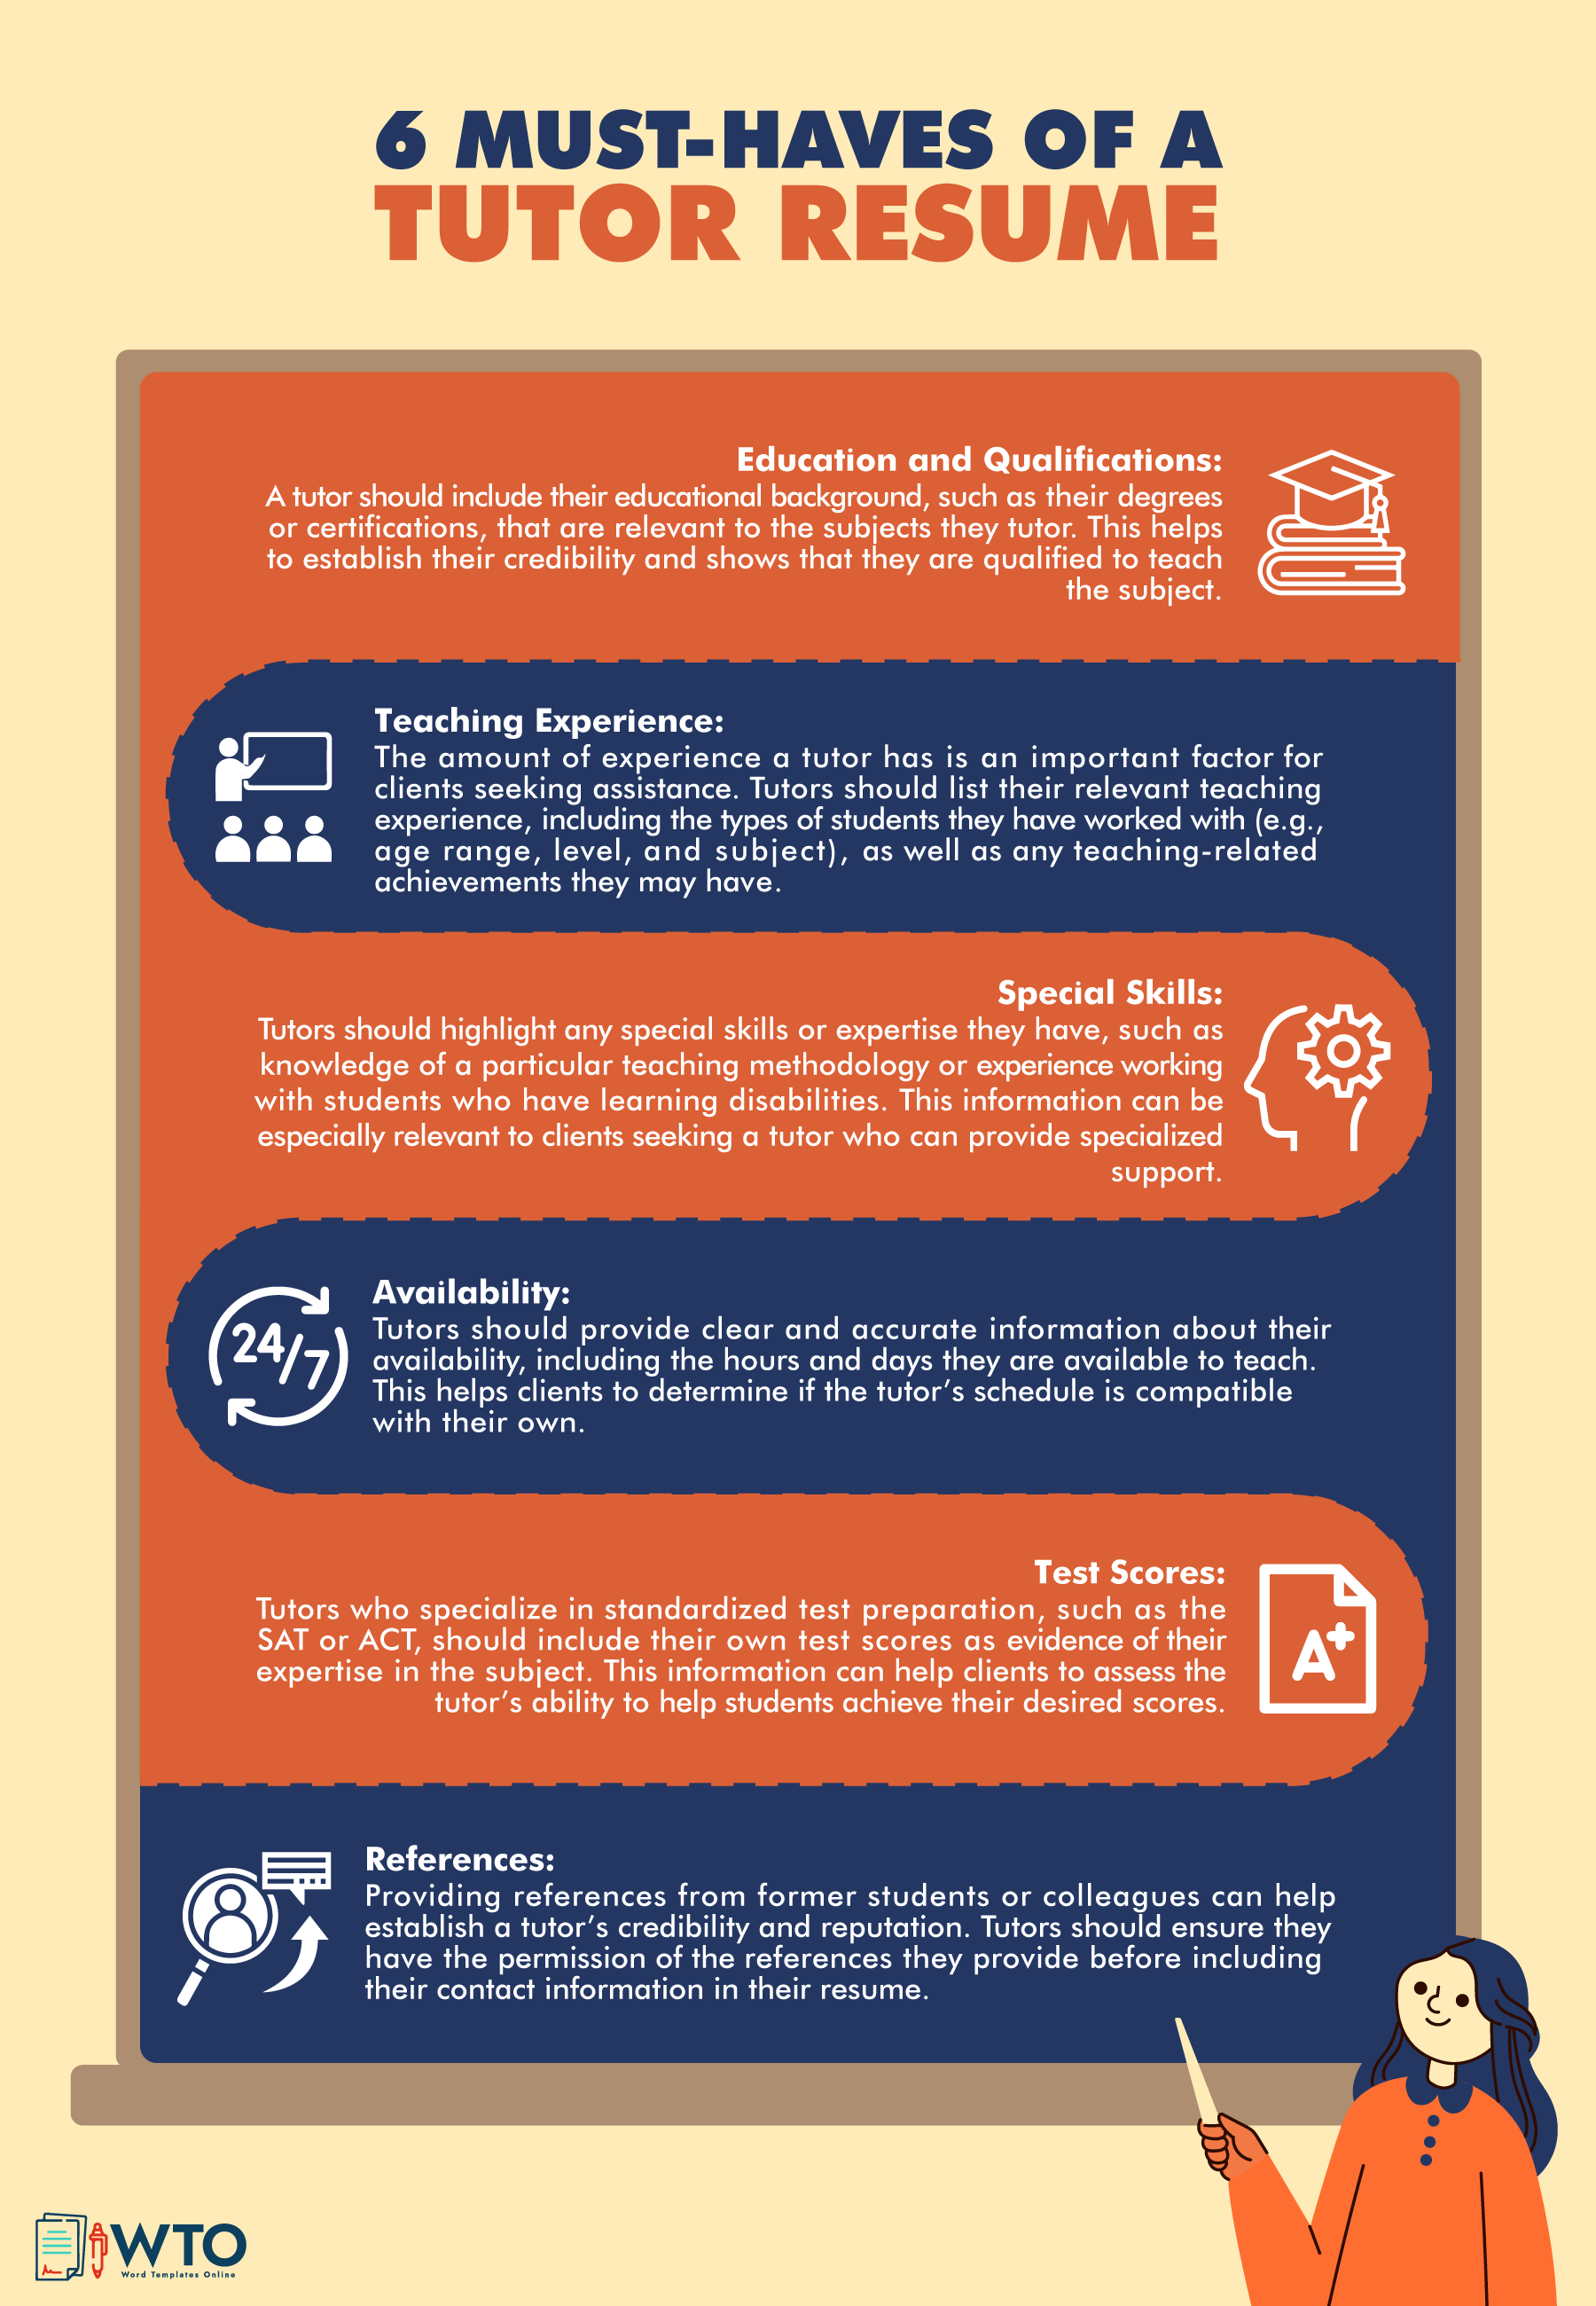 Tutor Resume must haves infographic